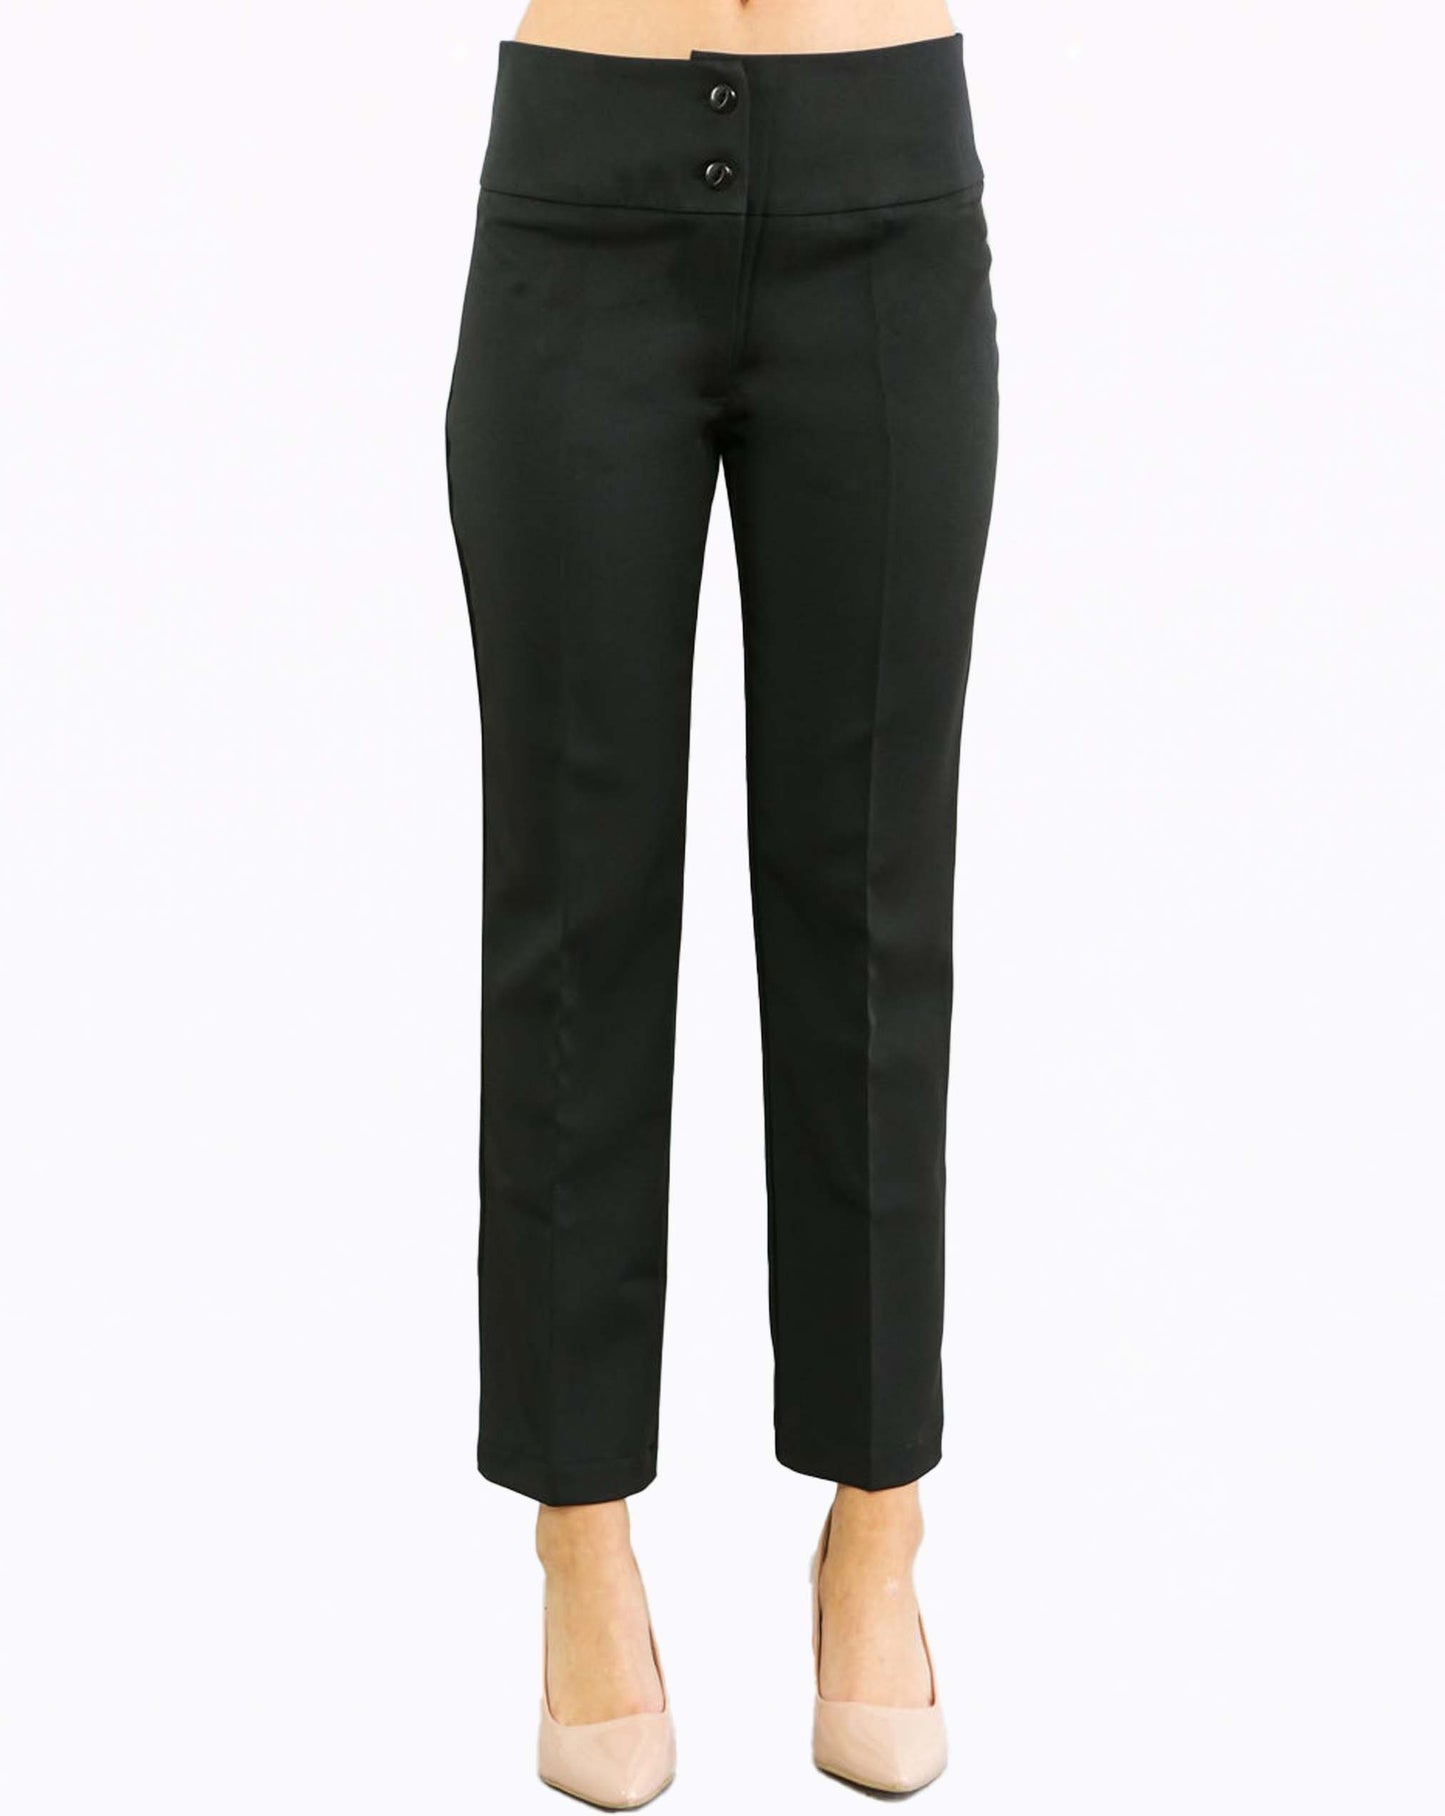 Signature Ankle Grazer Trousers (Luxury Twill)